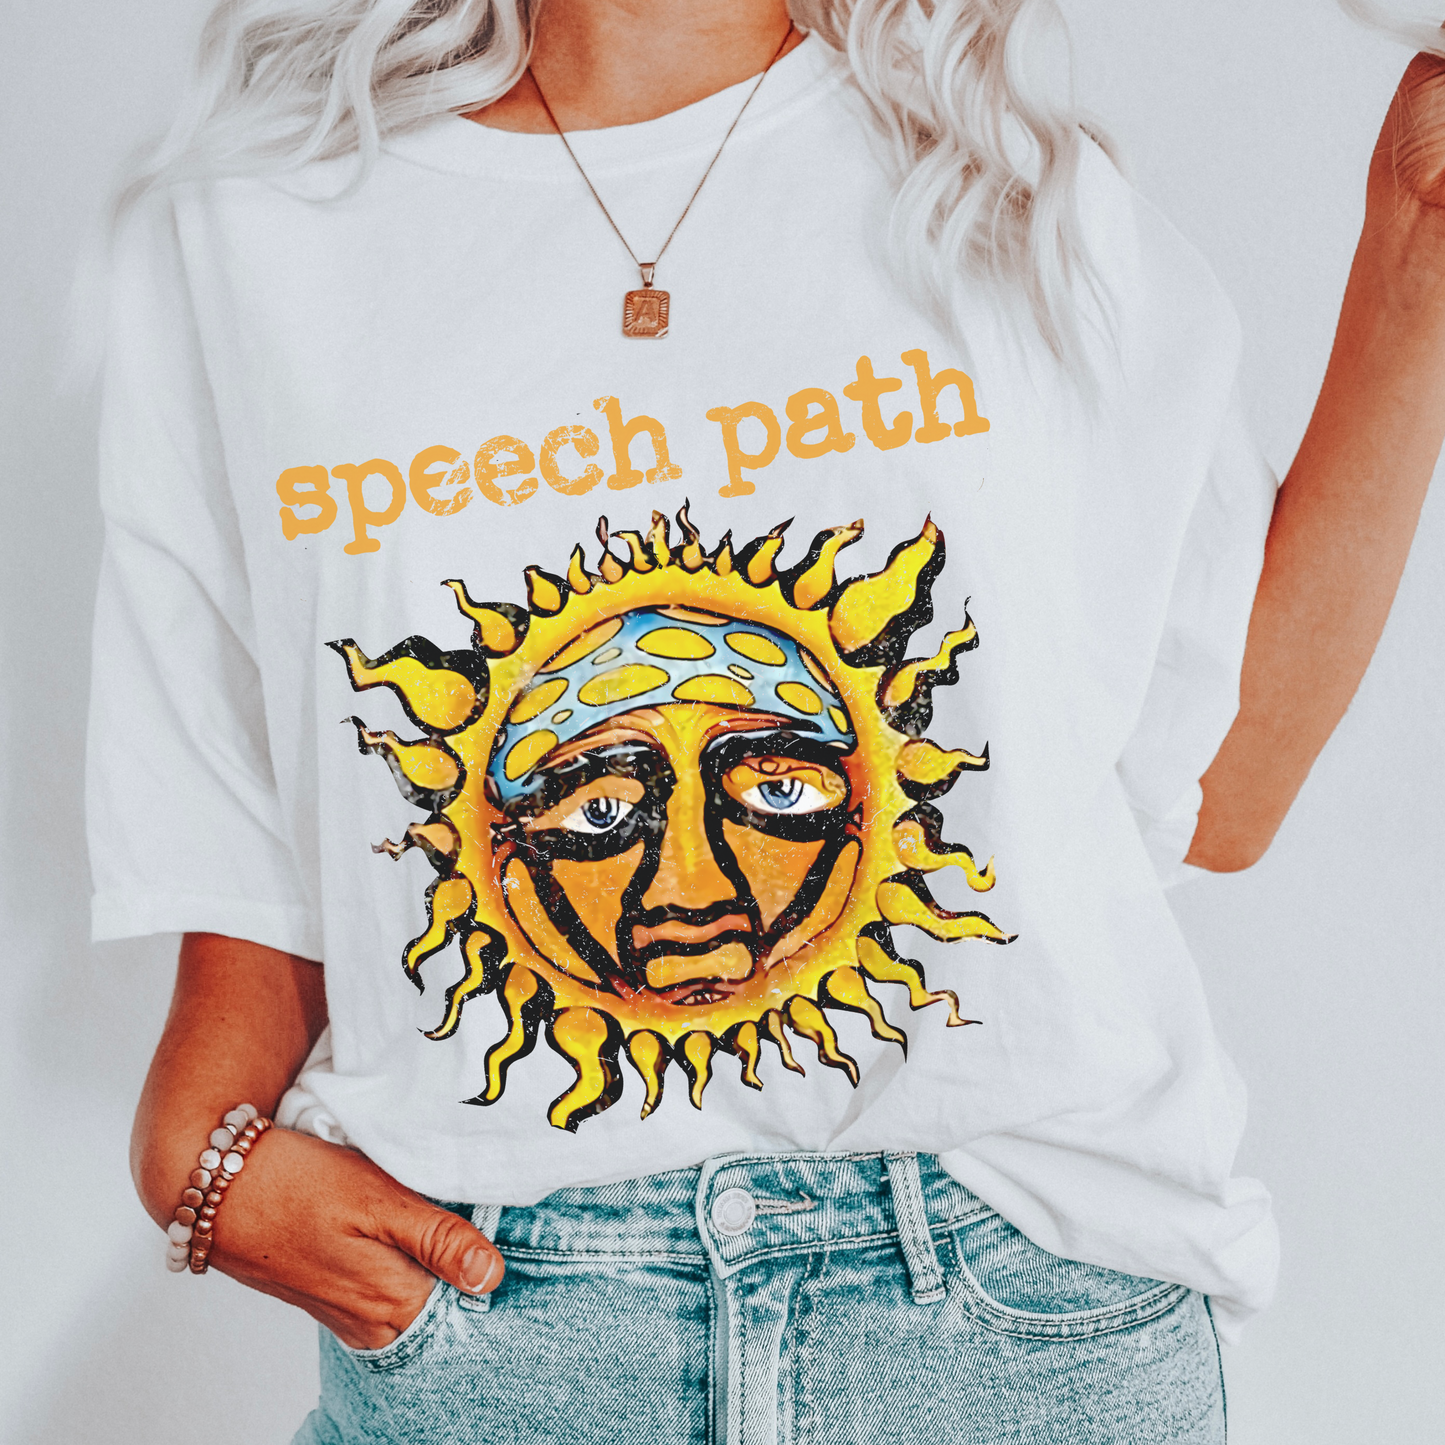 Speech Path Distressed Sun Band-Inspired Comfort Colors T-Shirt